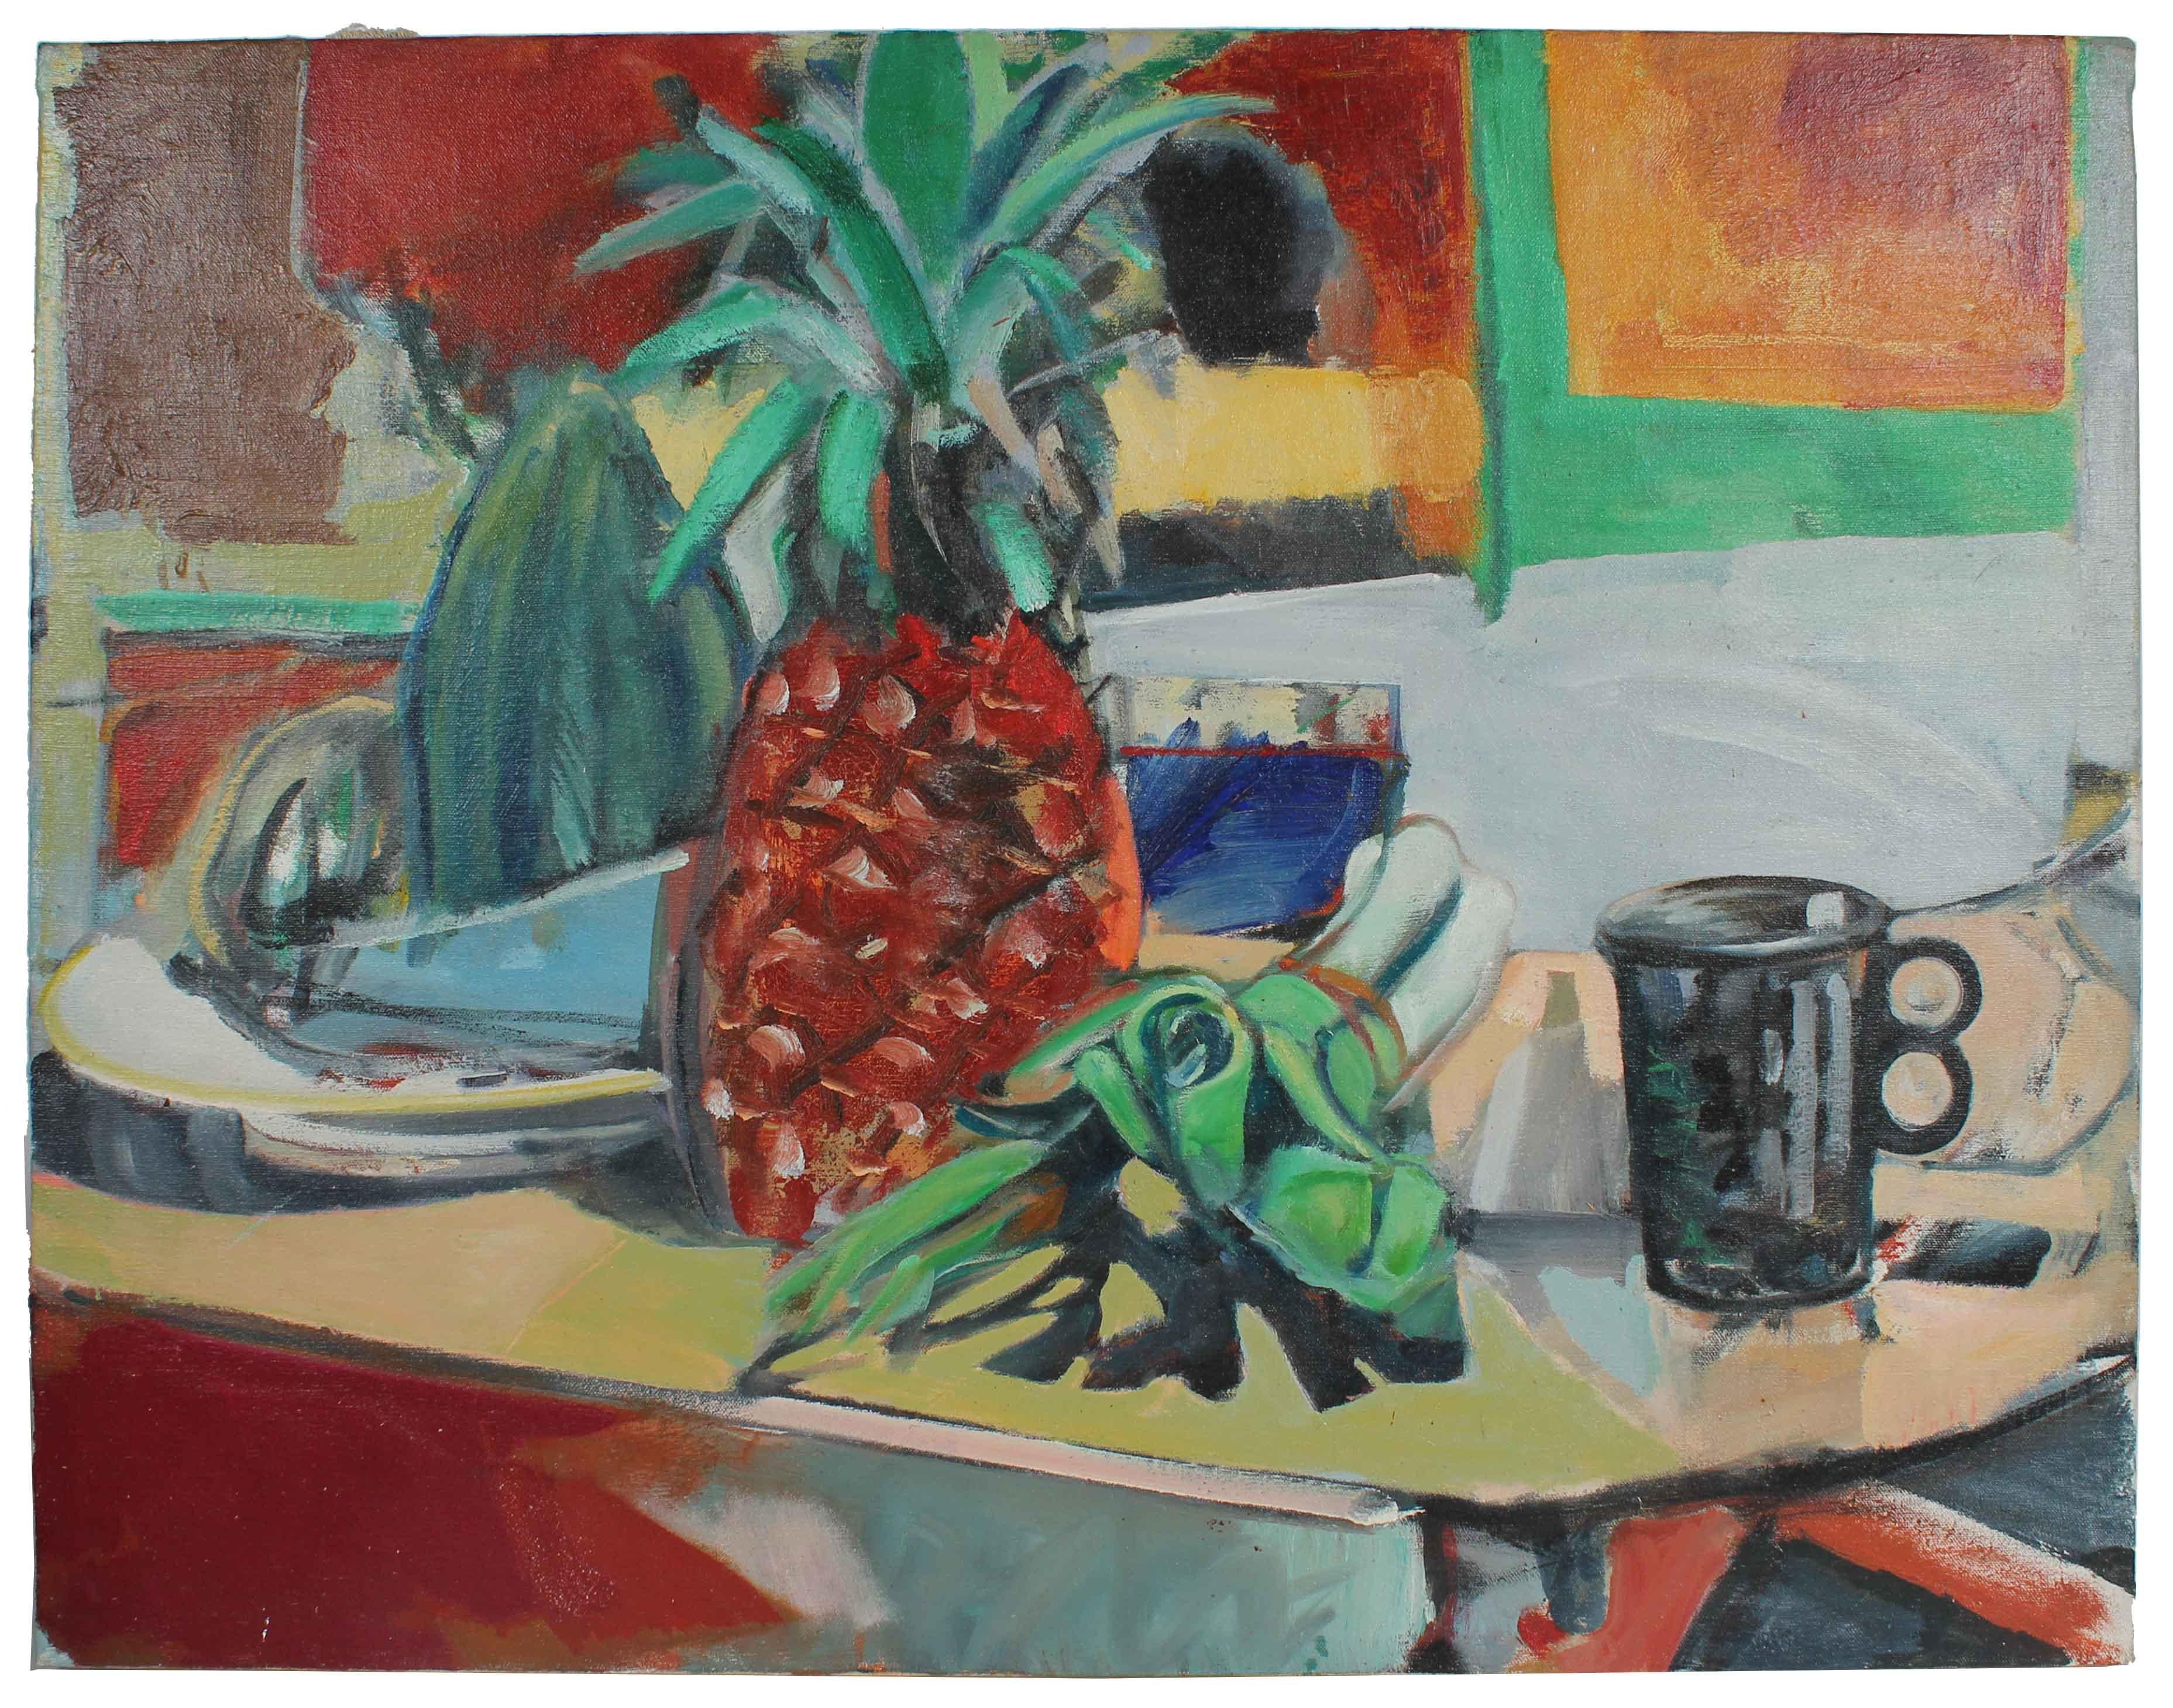 Jack Freeman Interior Painting - "Still Life with Pineapples" Oil on Canvas, 1975